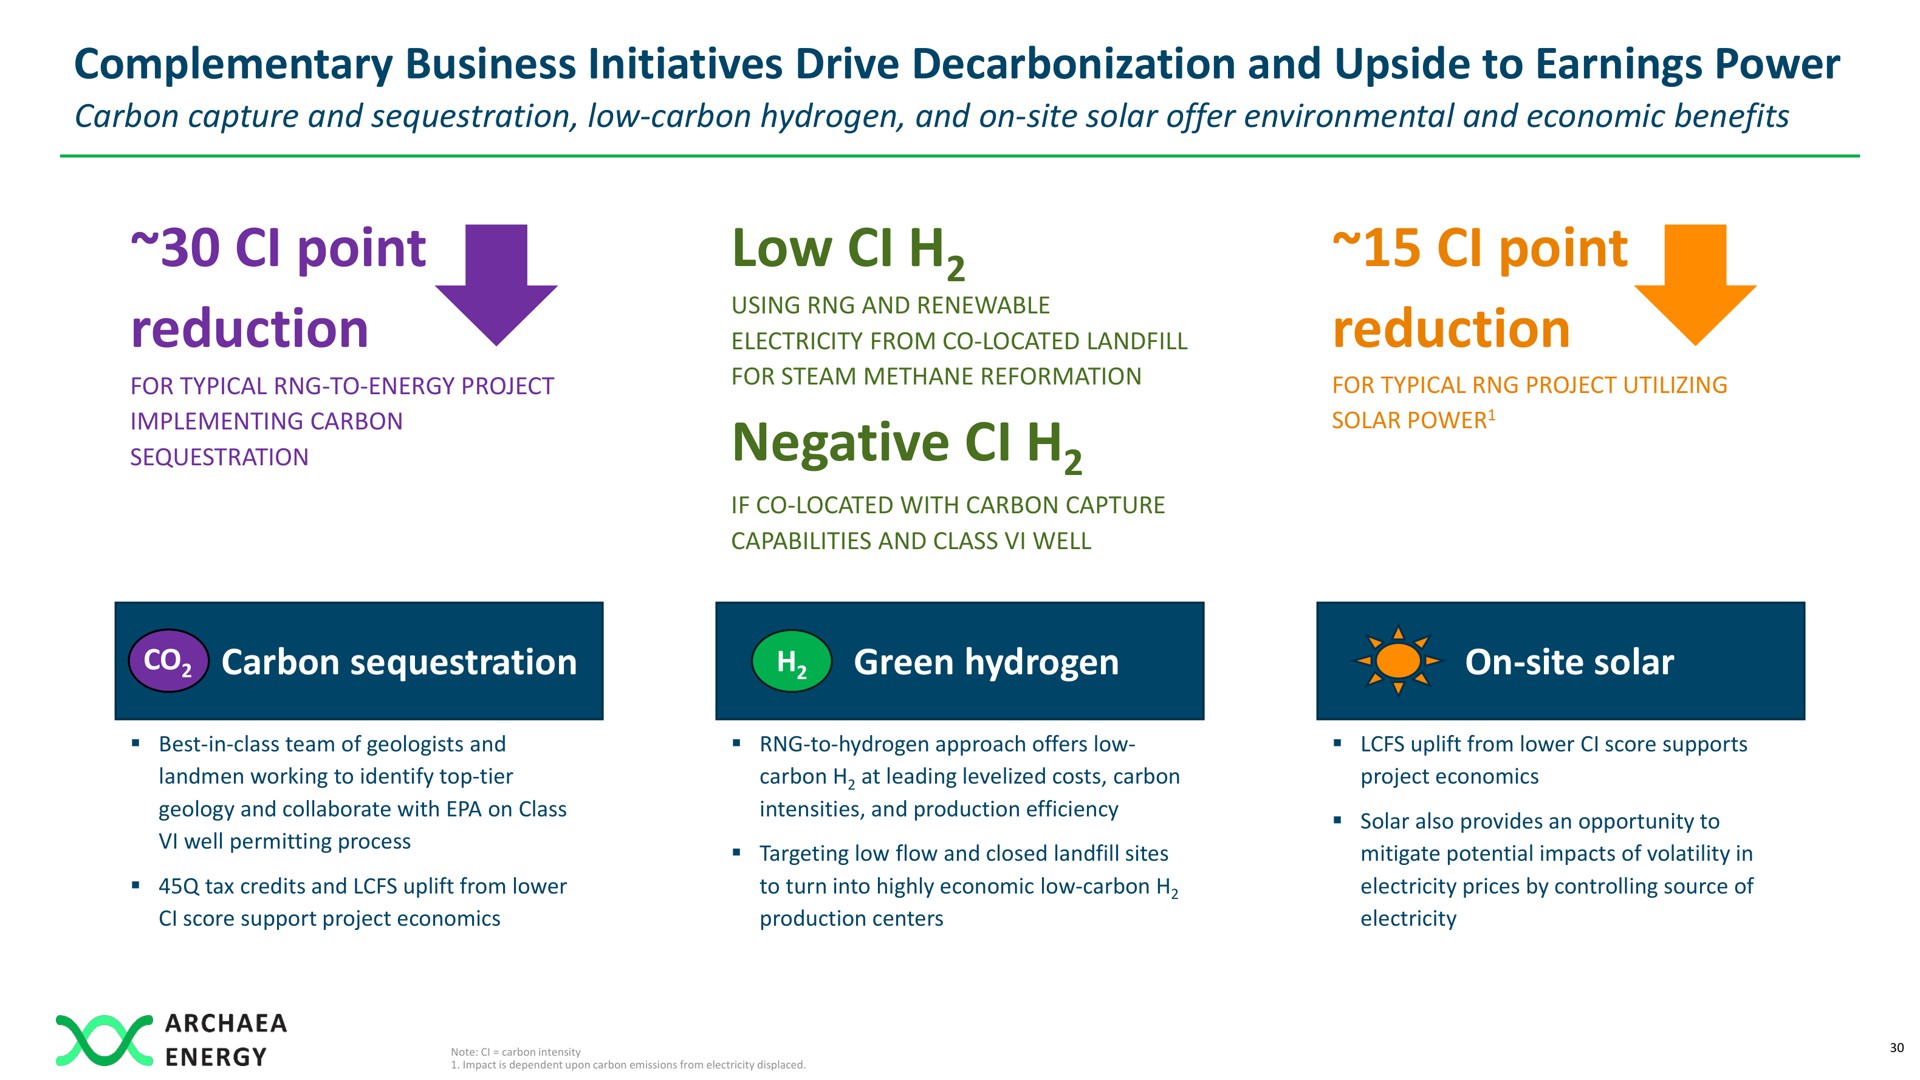 complementary business initiatives drive decarbonization and upside to earnings power point reduction low negative point reduction carbon sequestration | Archaea Energy